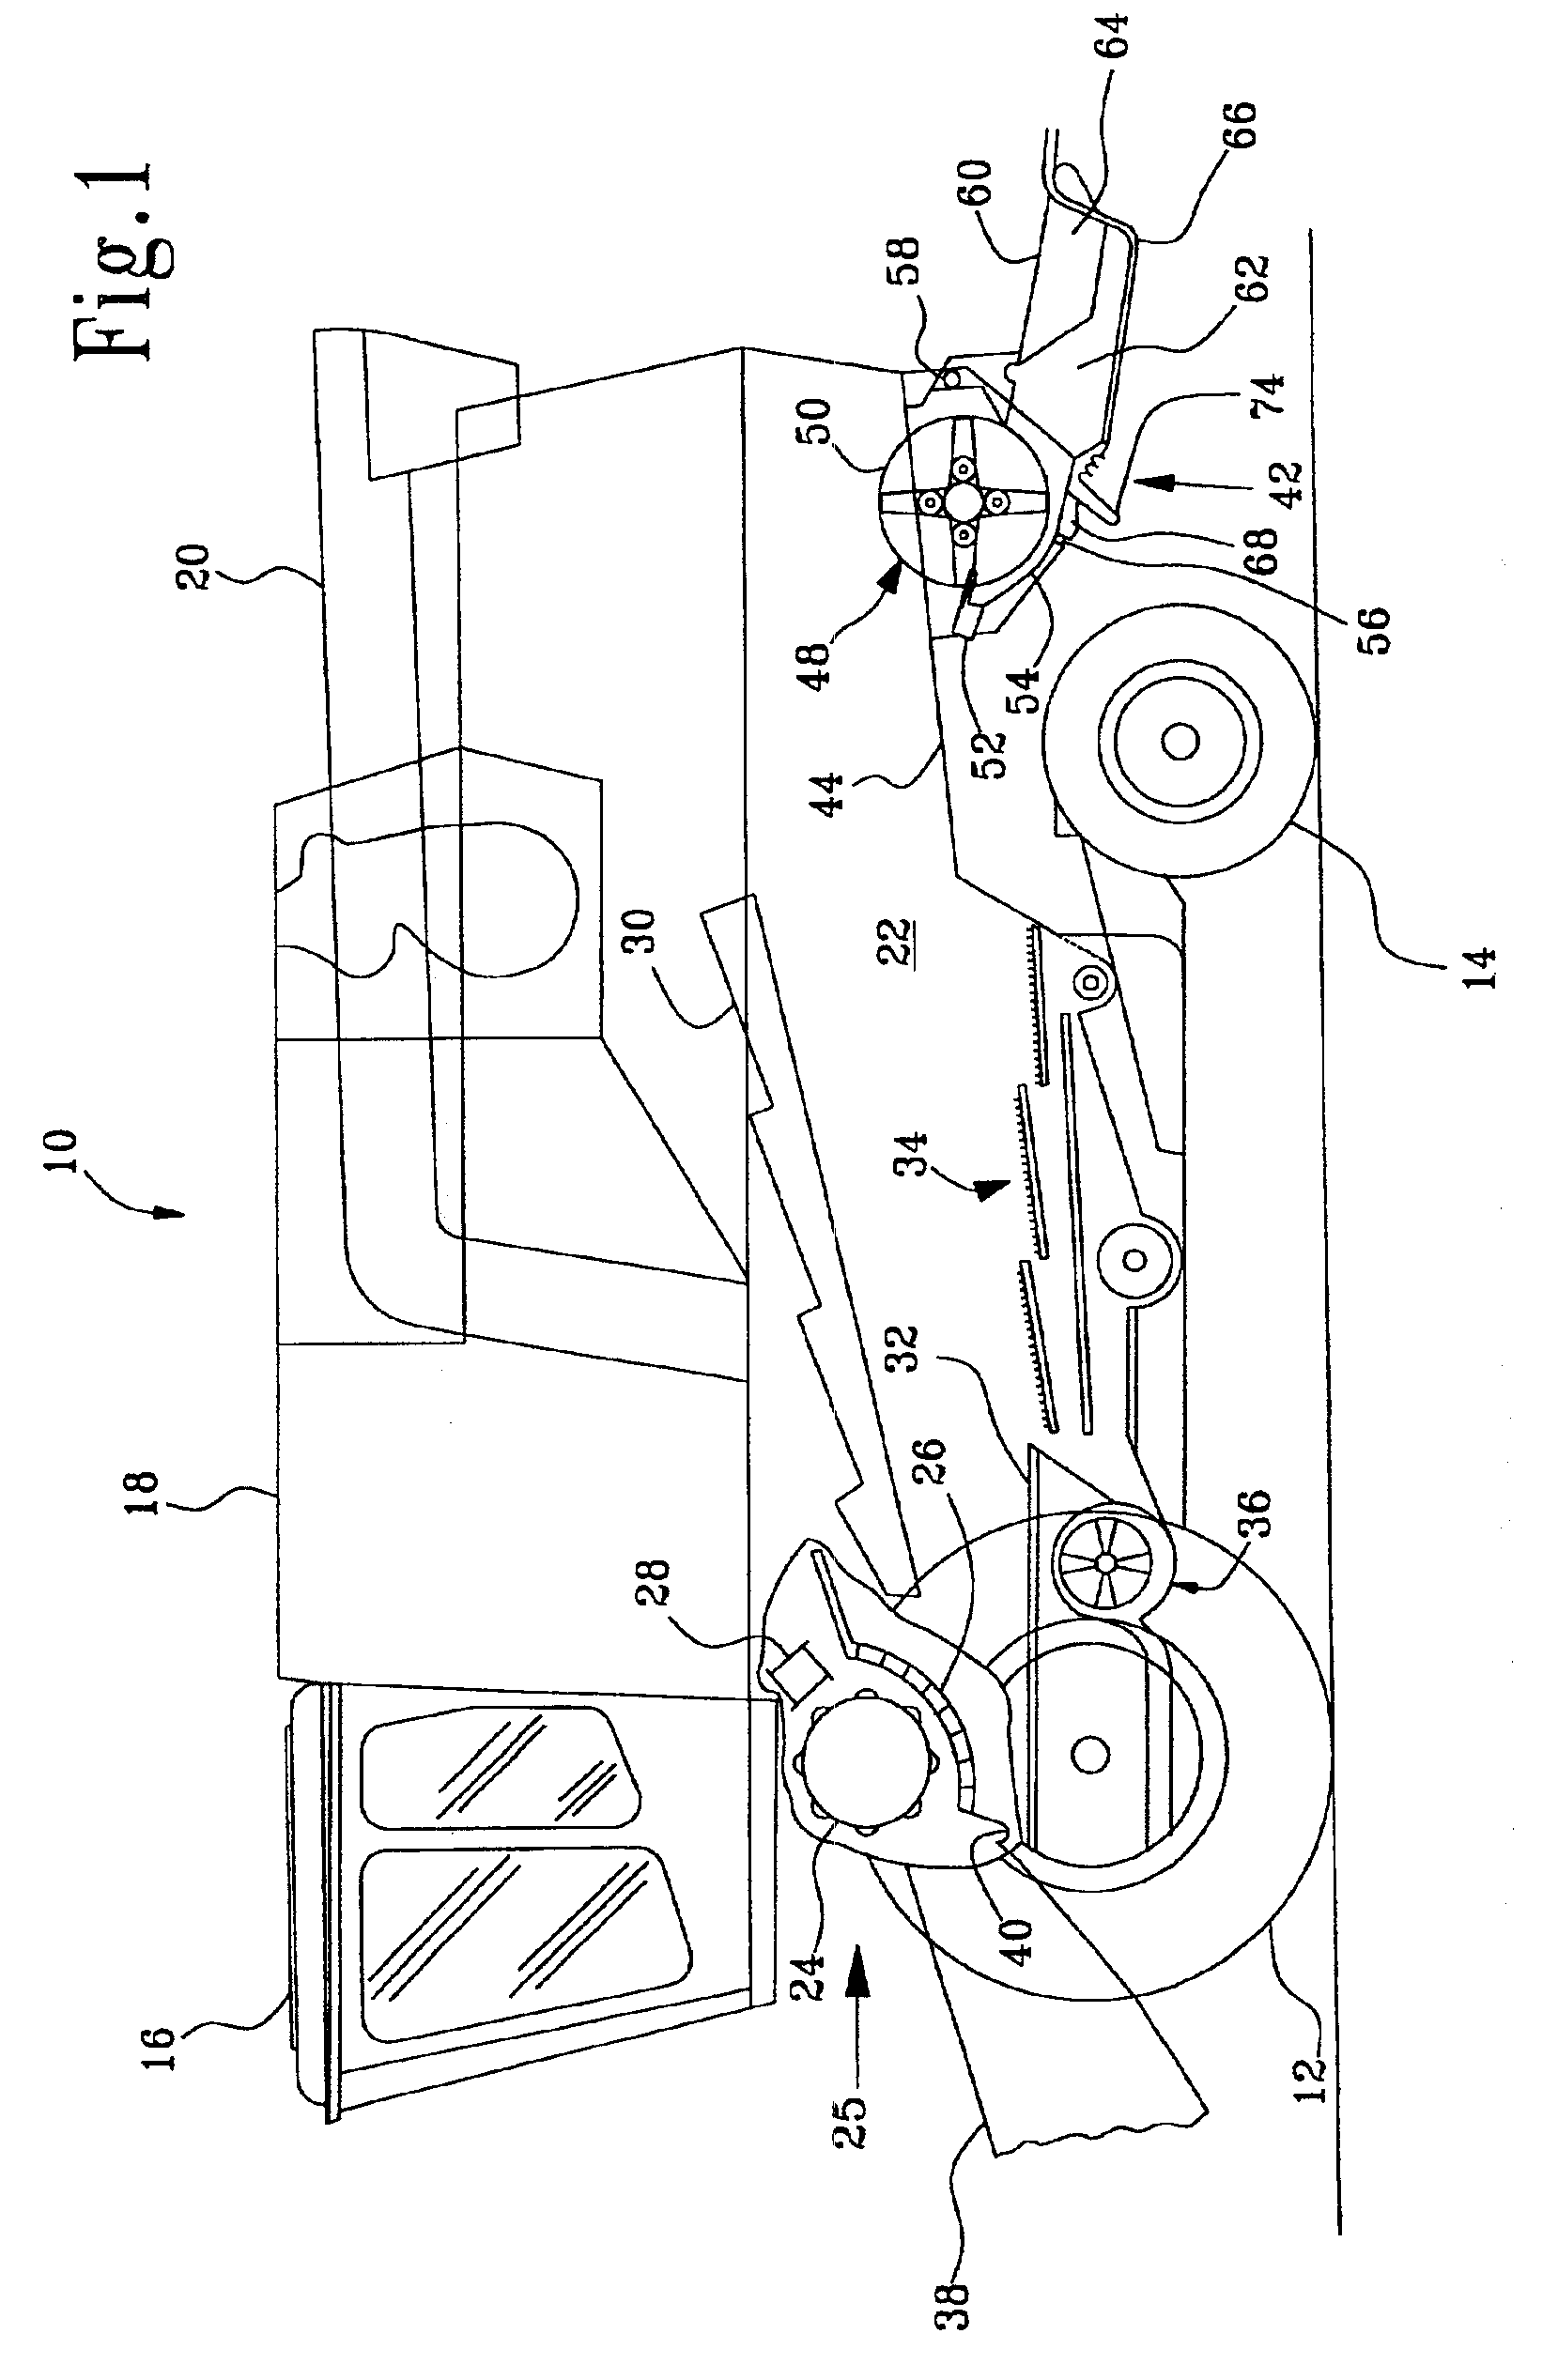 Distributing device having continuously moving guide vanes